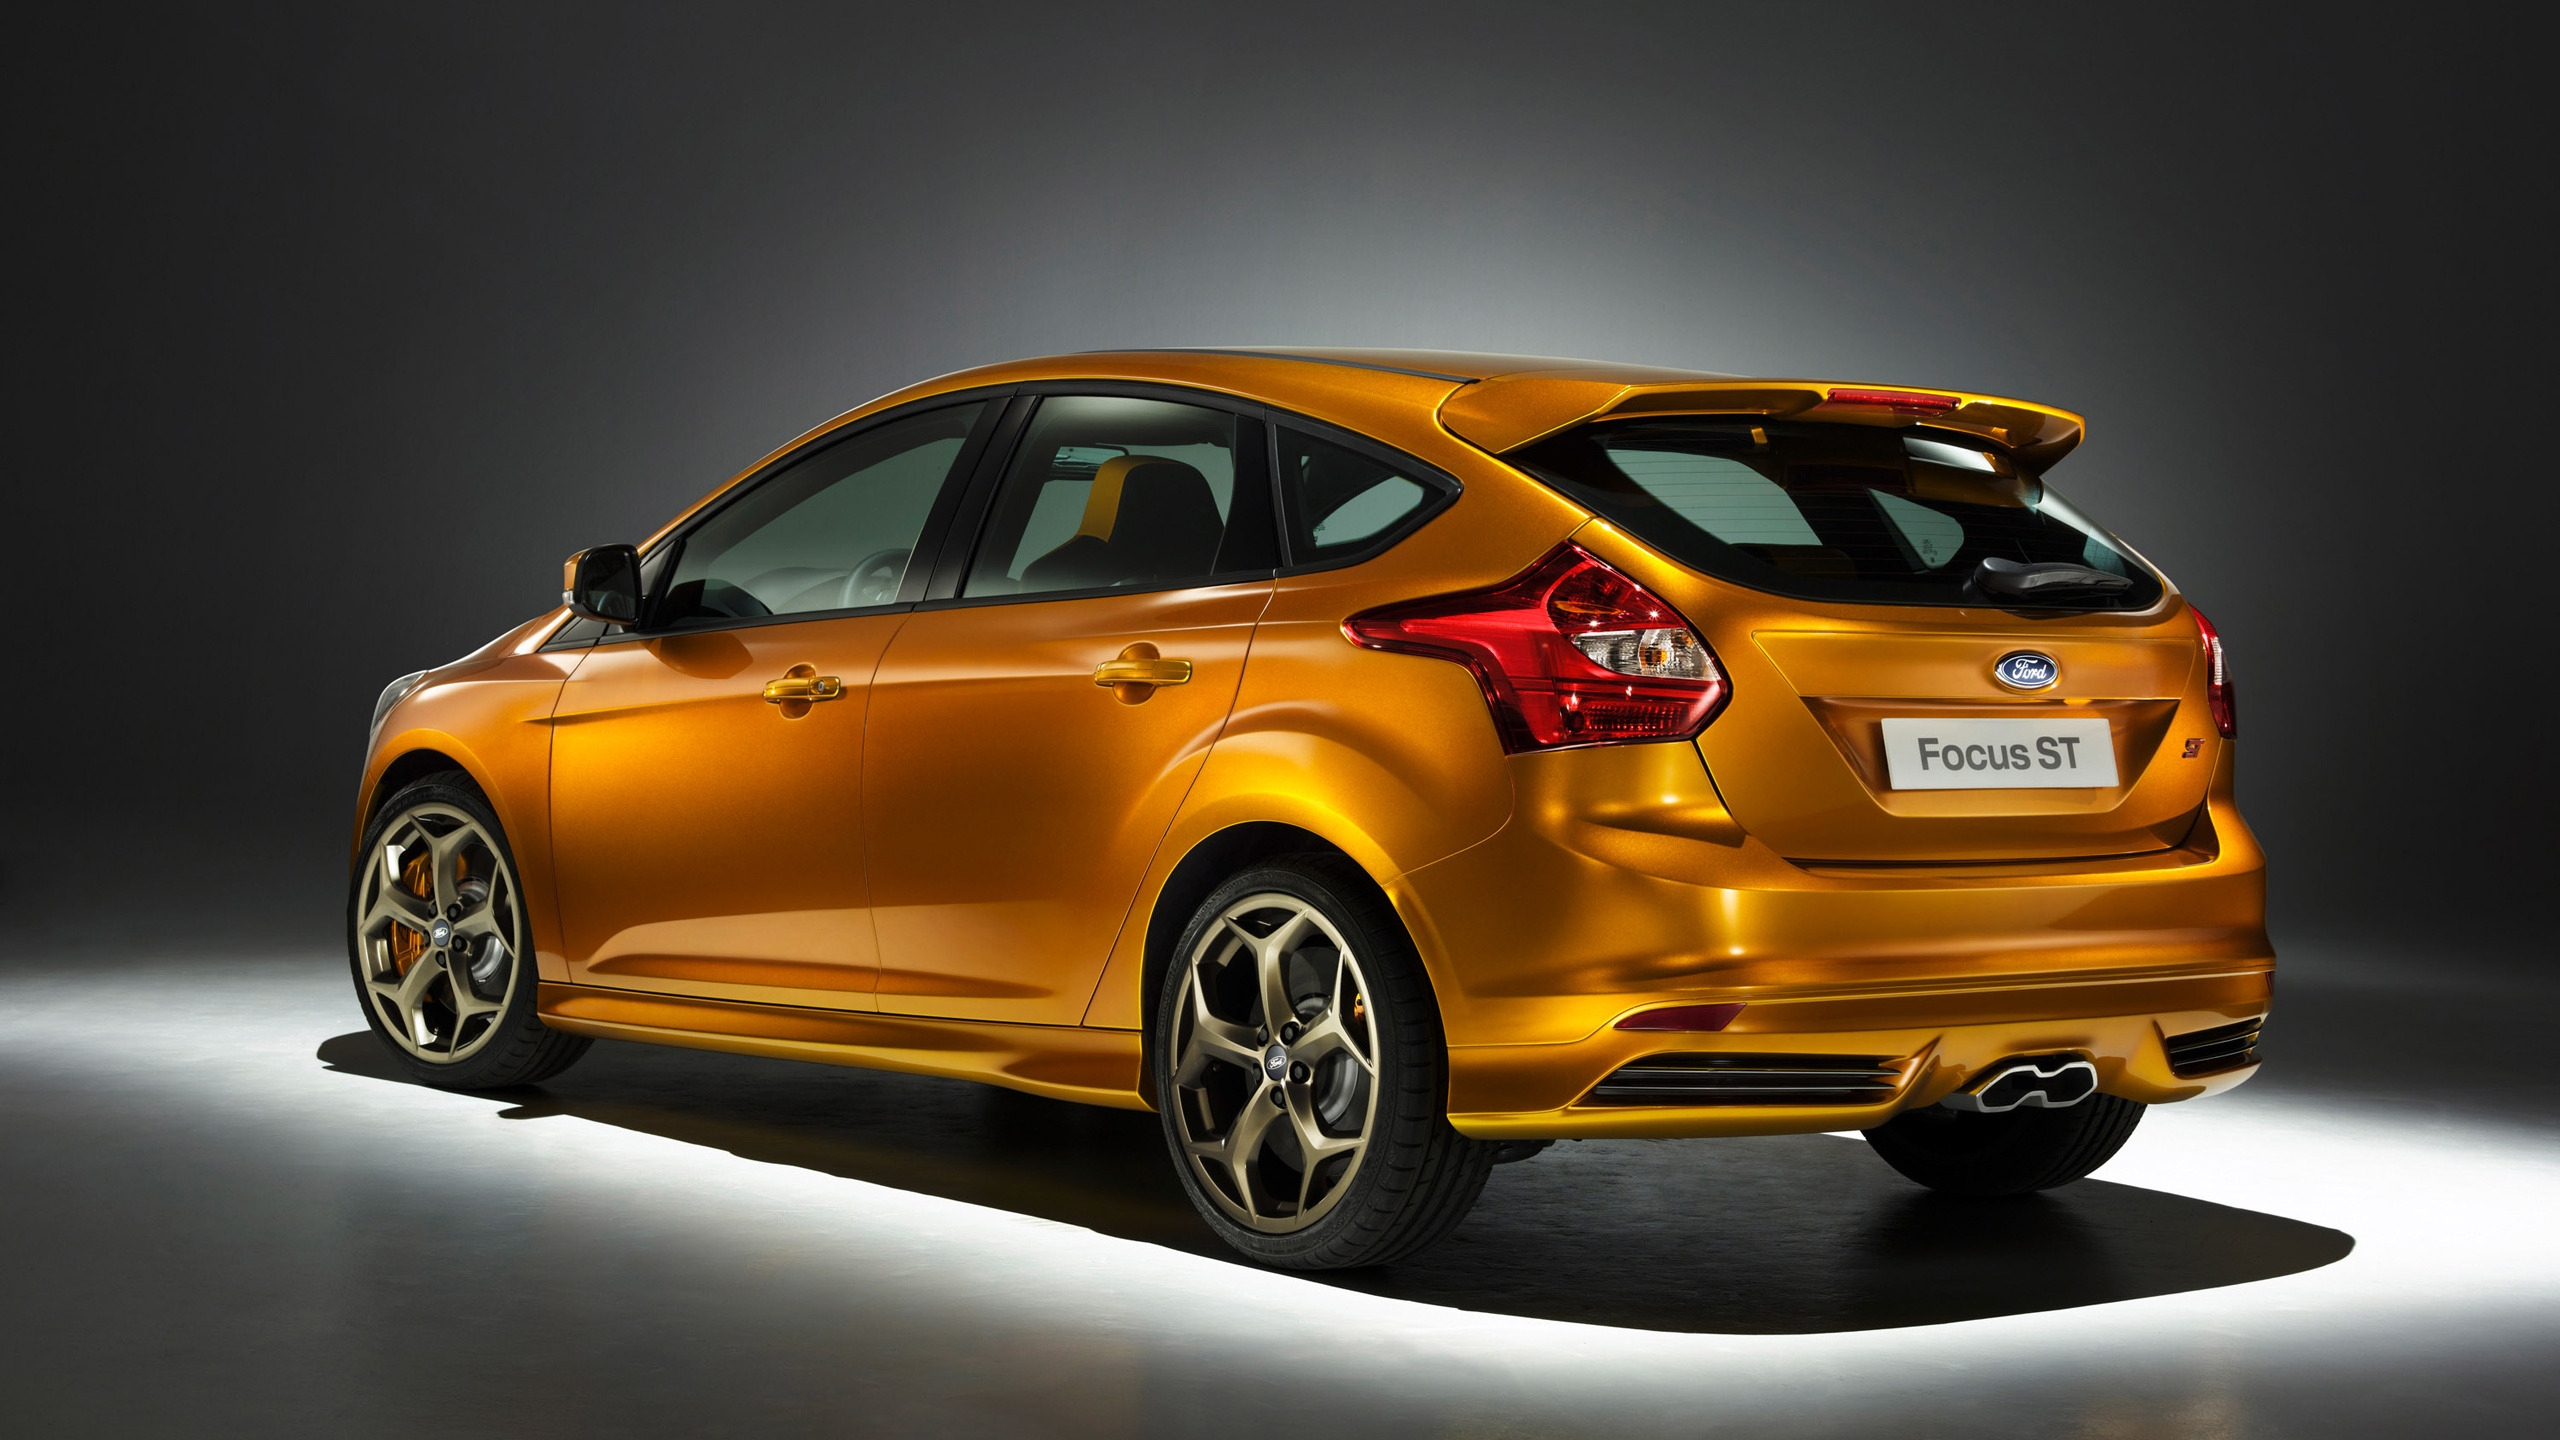 2012 Ford Focus ST for 2560x1440 HDTV resolution